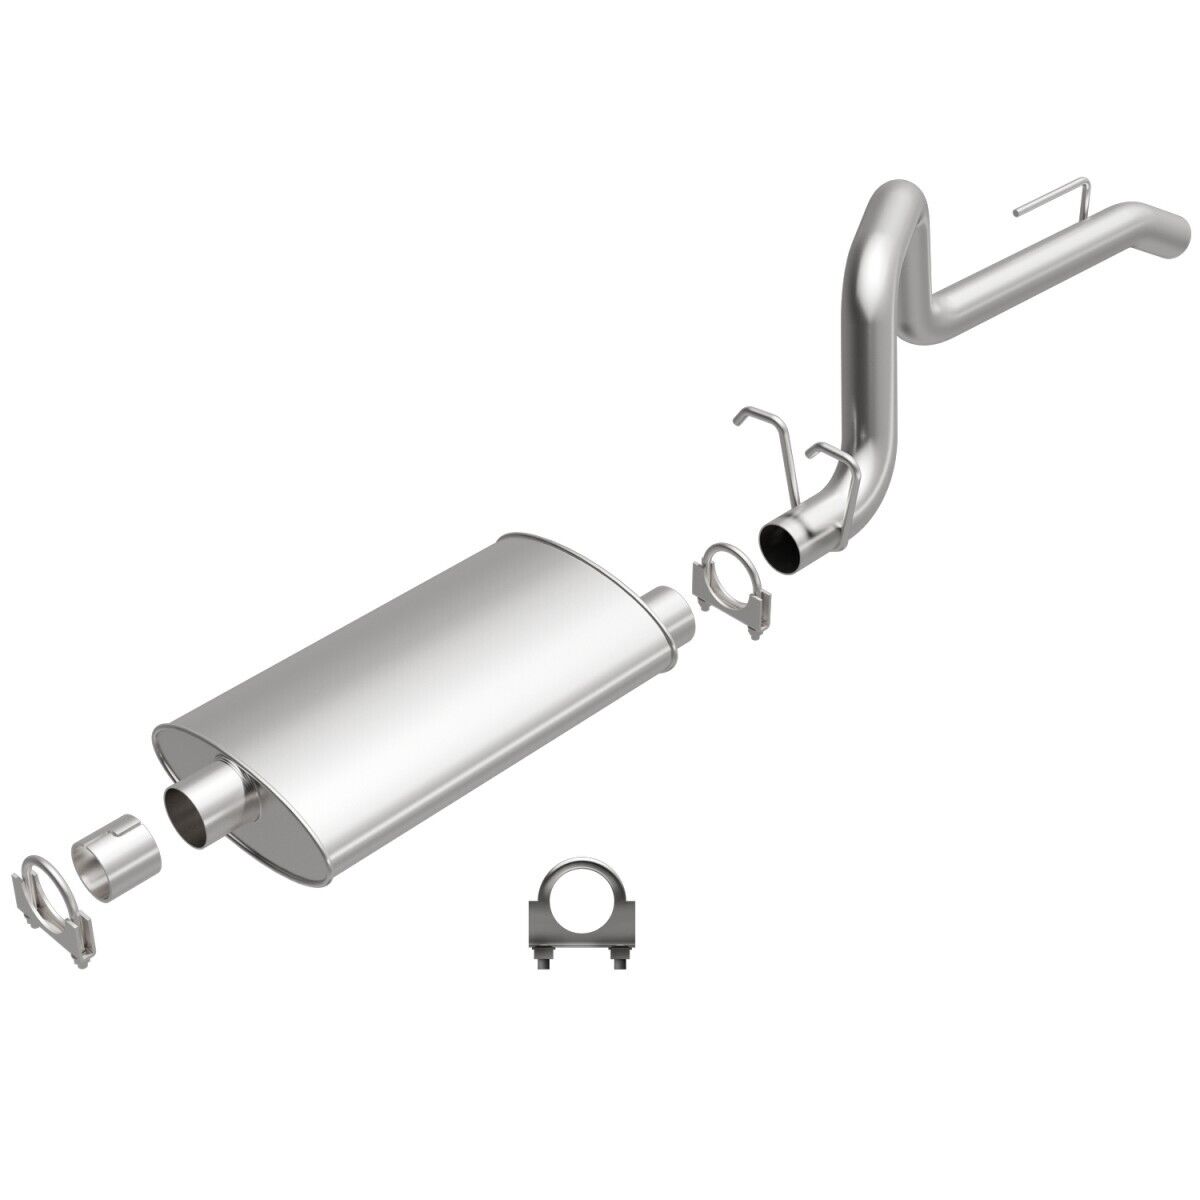 106-0051 BRExhaust Exhaust System for Jeep Wrangler 1987-1995